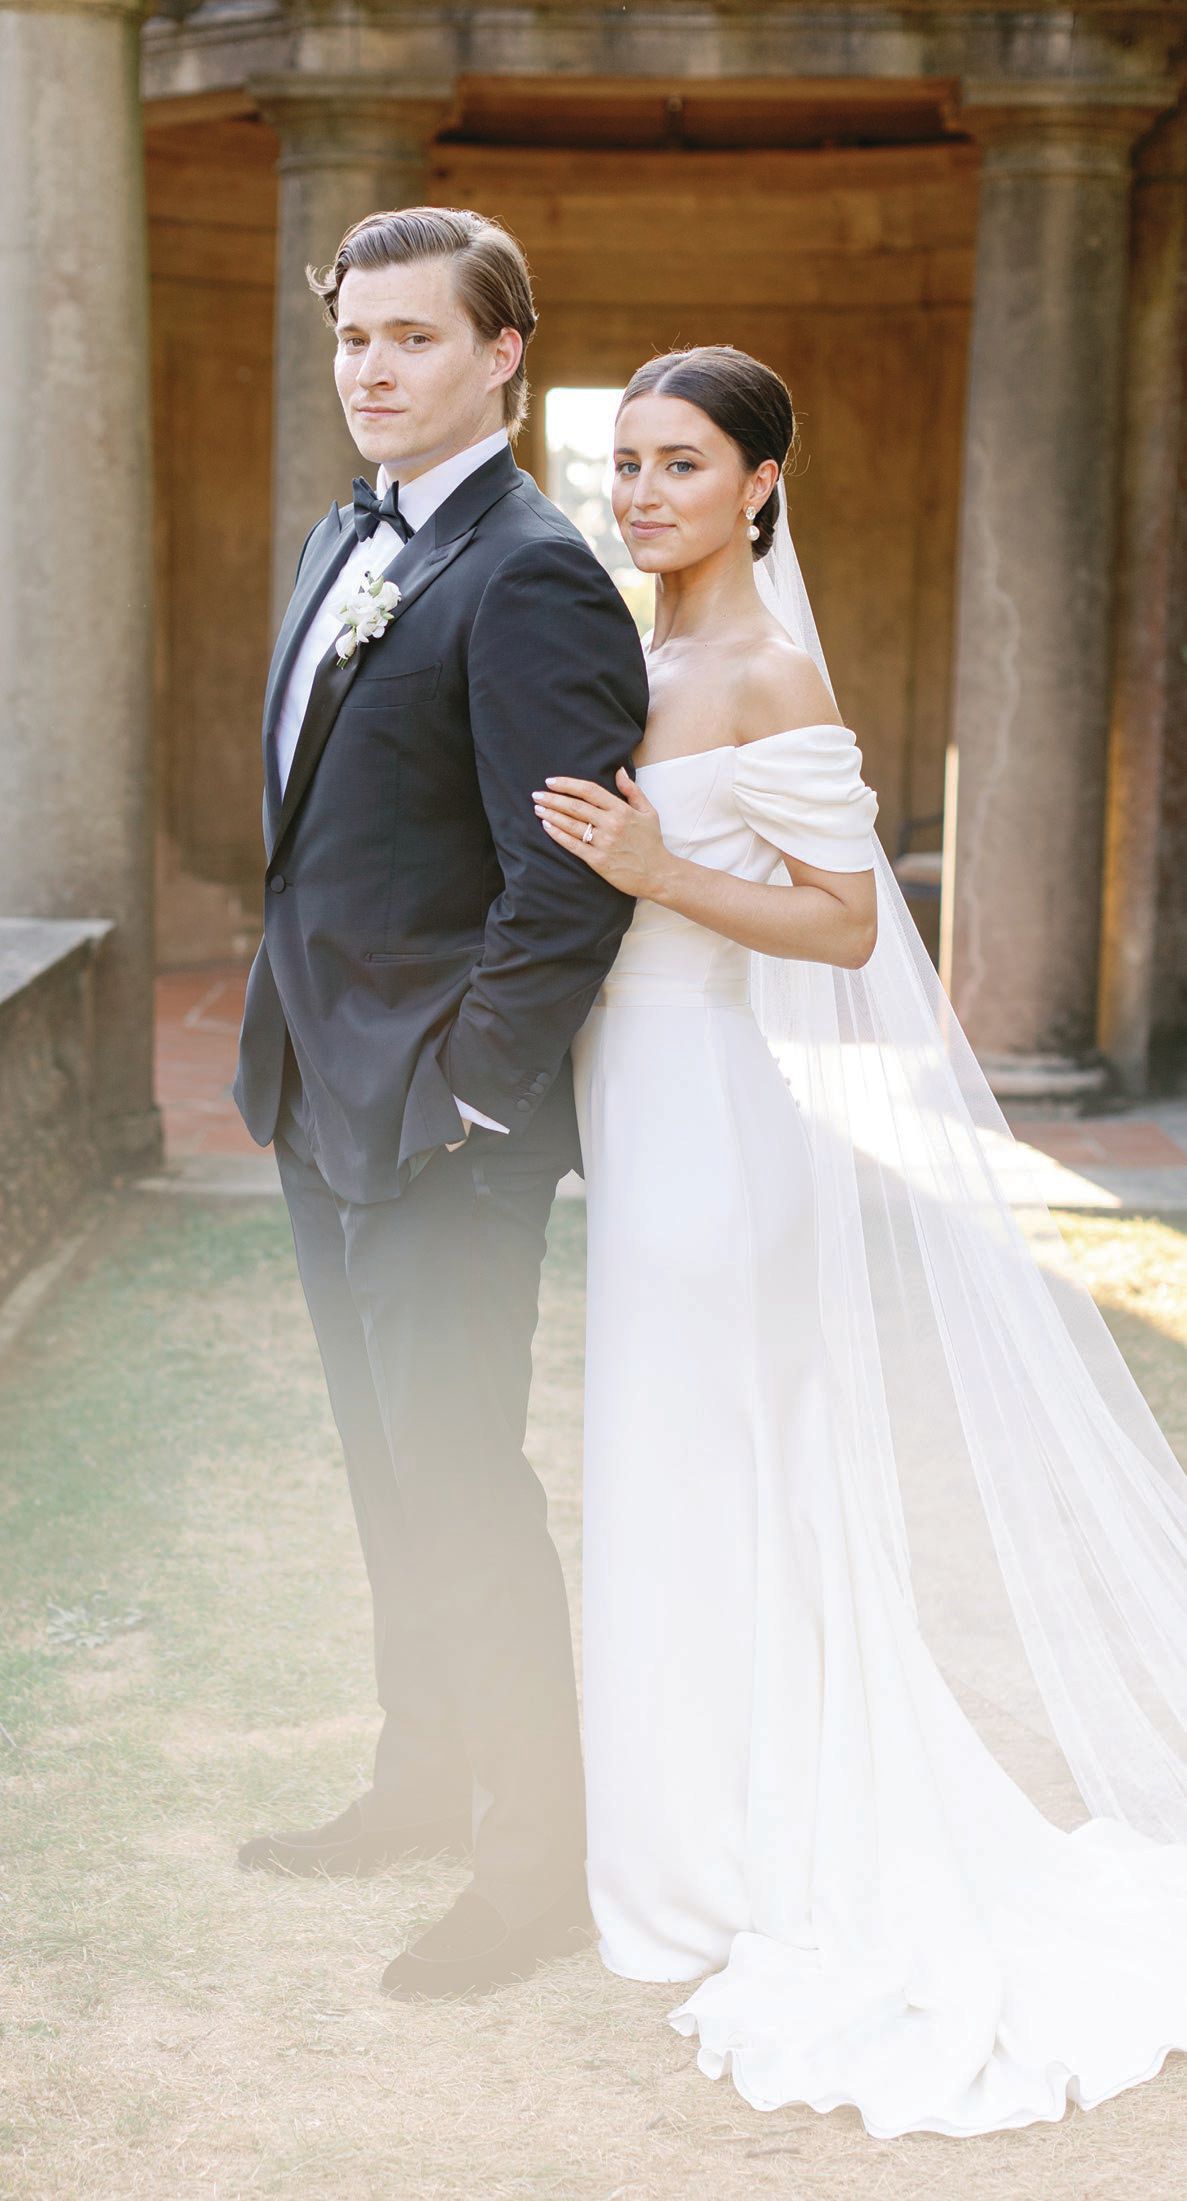 The newlyweds posed for a sophisticated portrait. Photographed by Alisha Norden Photography